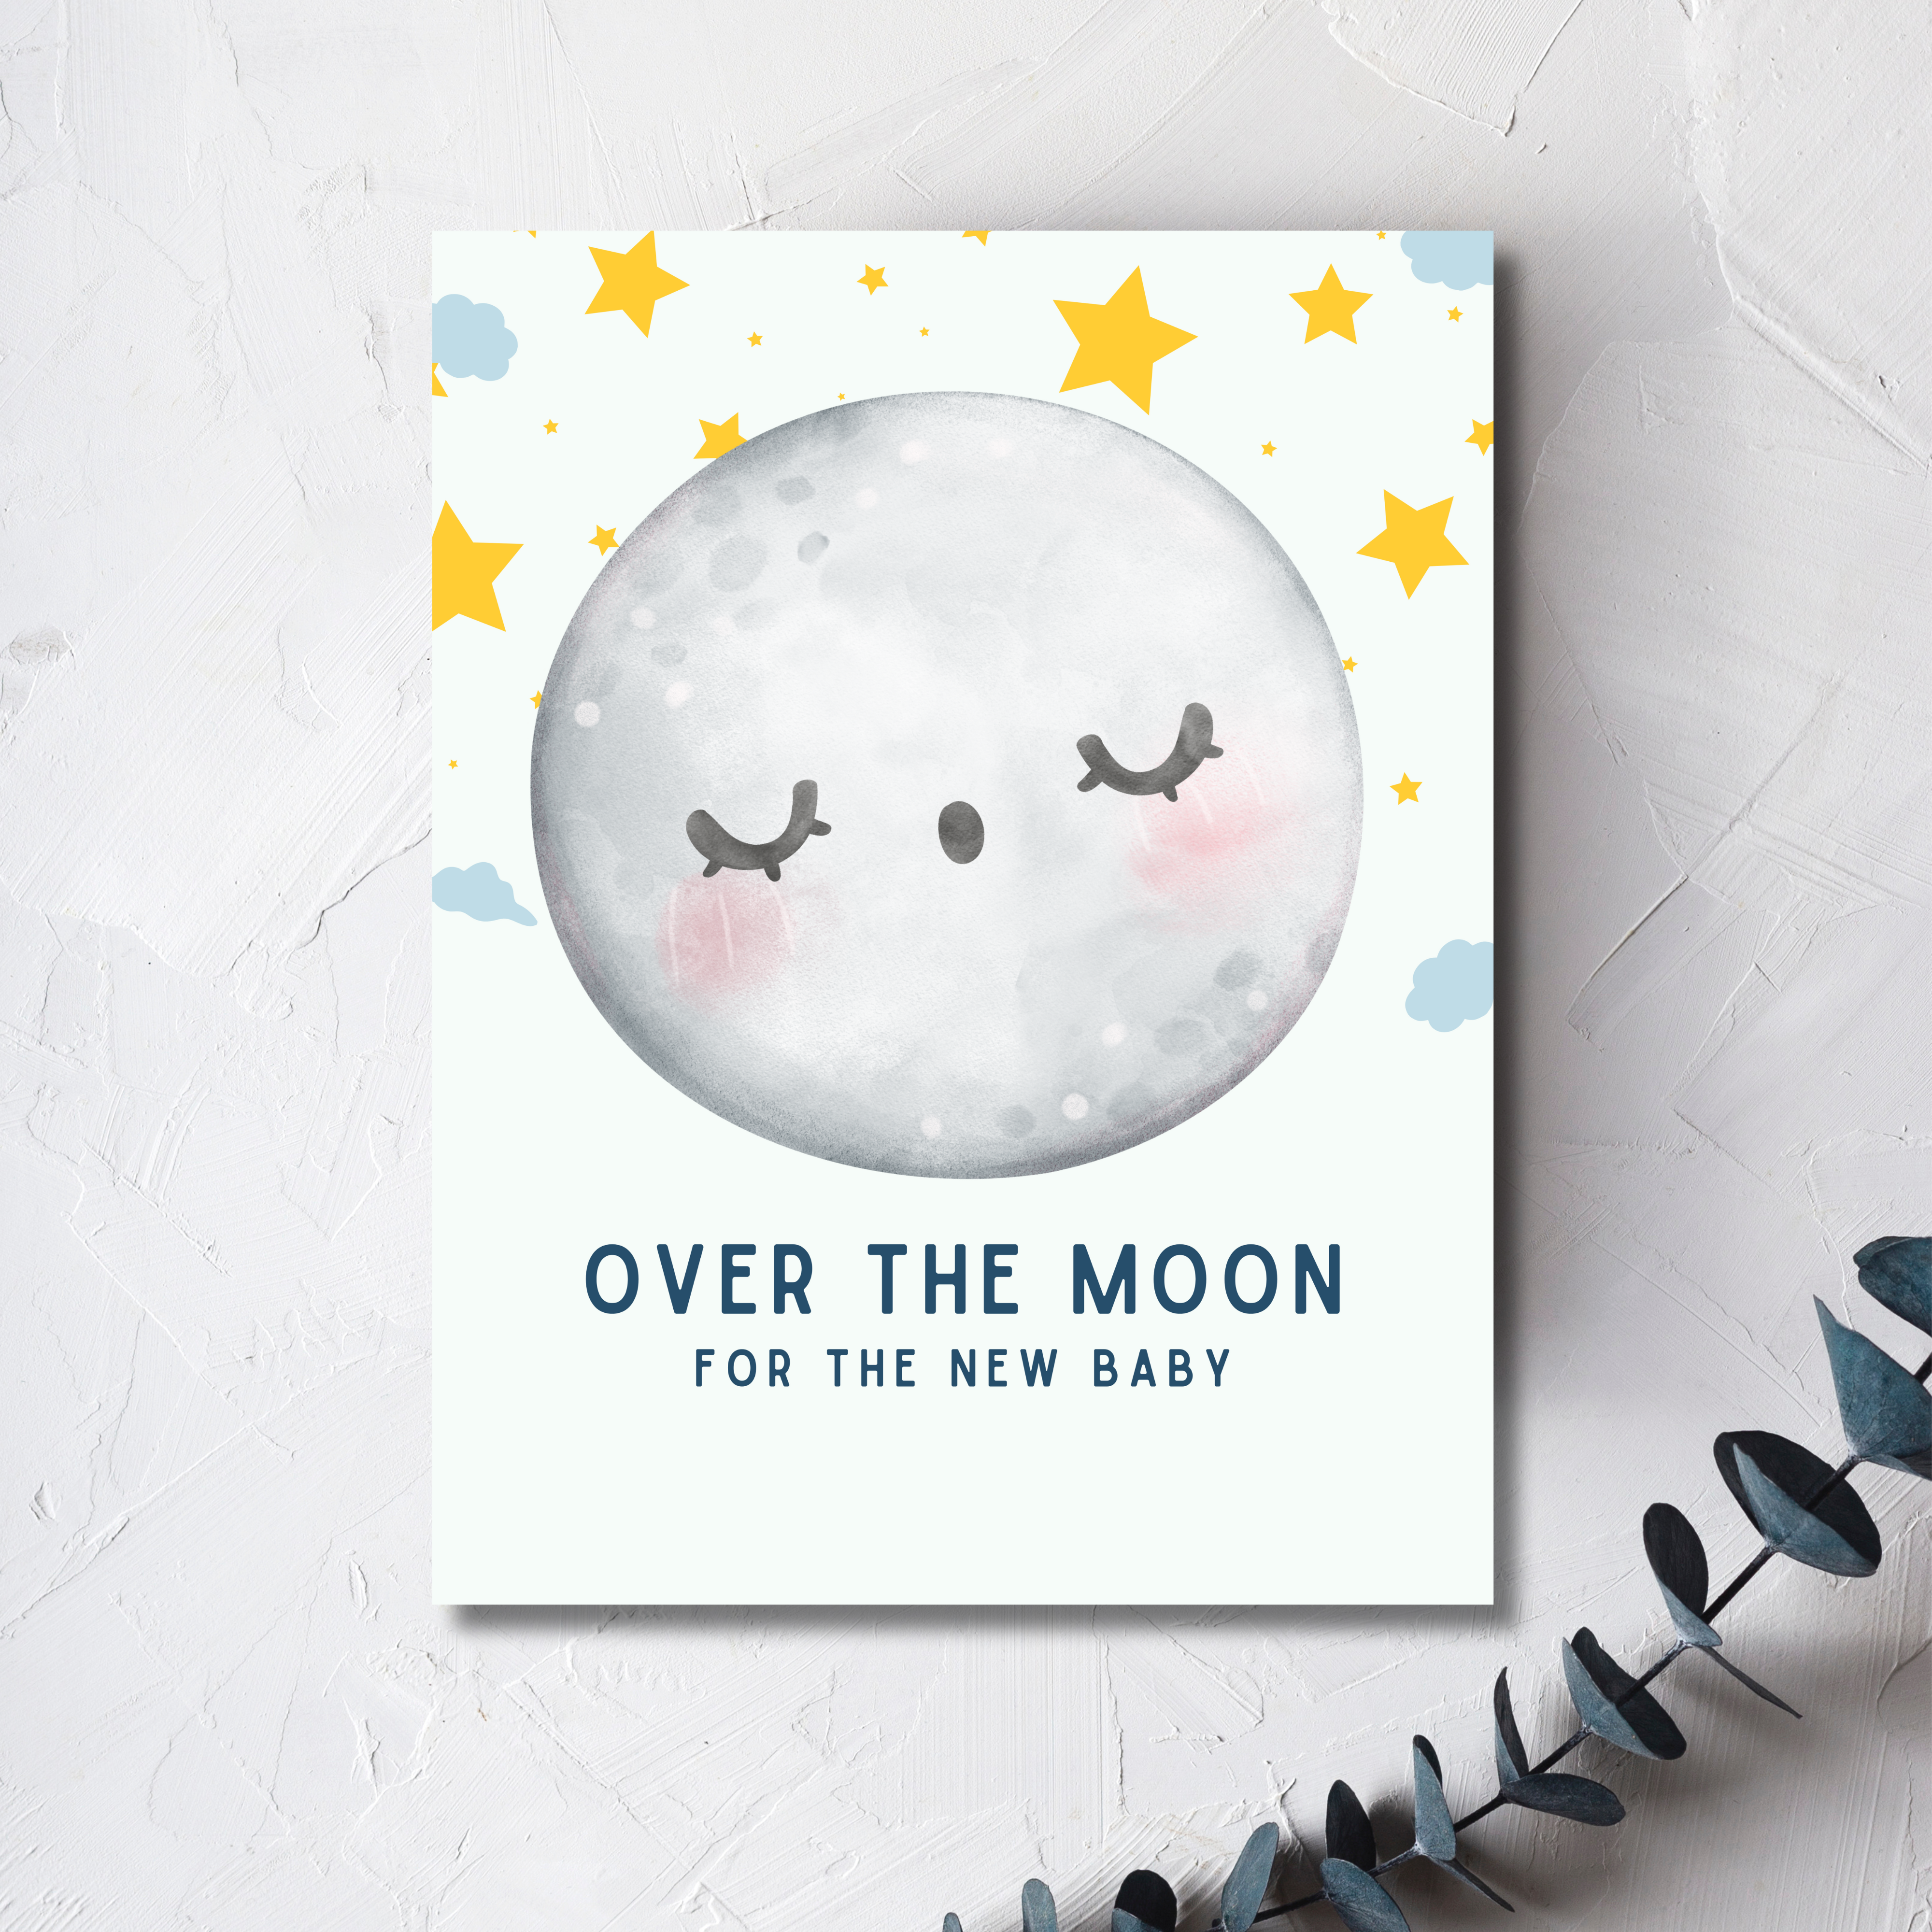 Image of an illustrated watercolor full moon blushing with stars in the sky, text reads Over The Moon For The New Baby below in blue